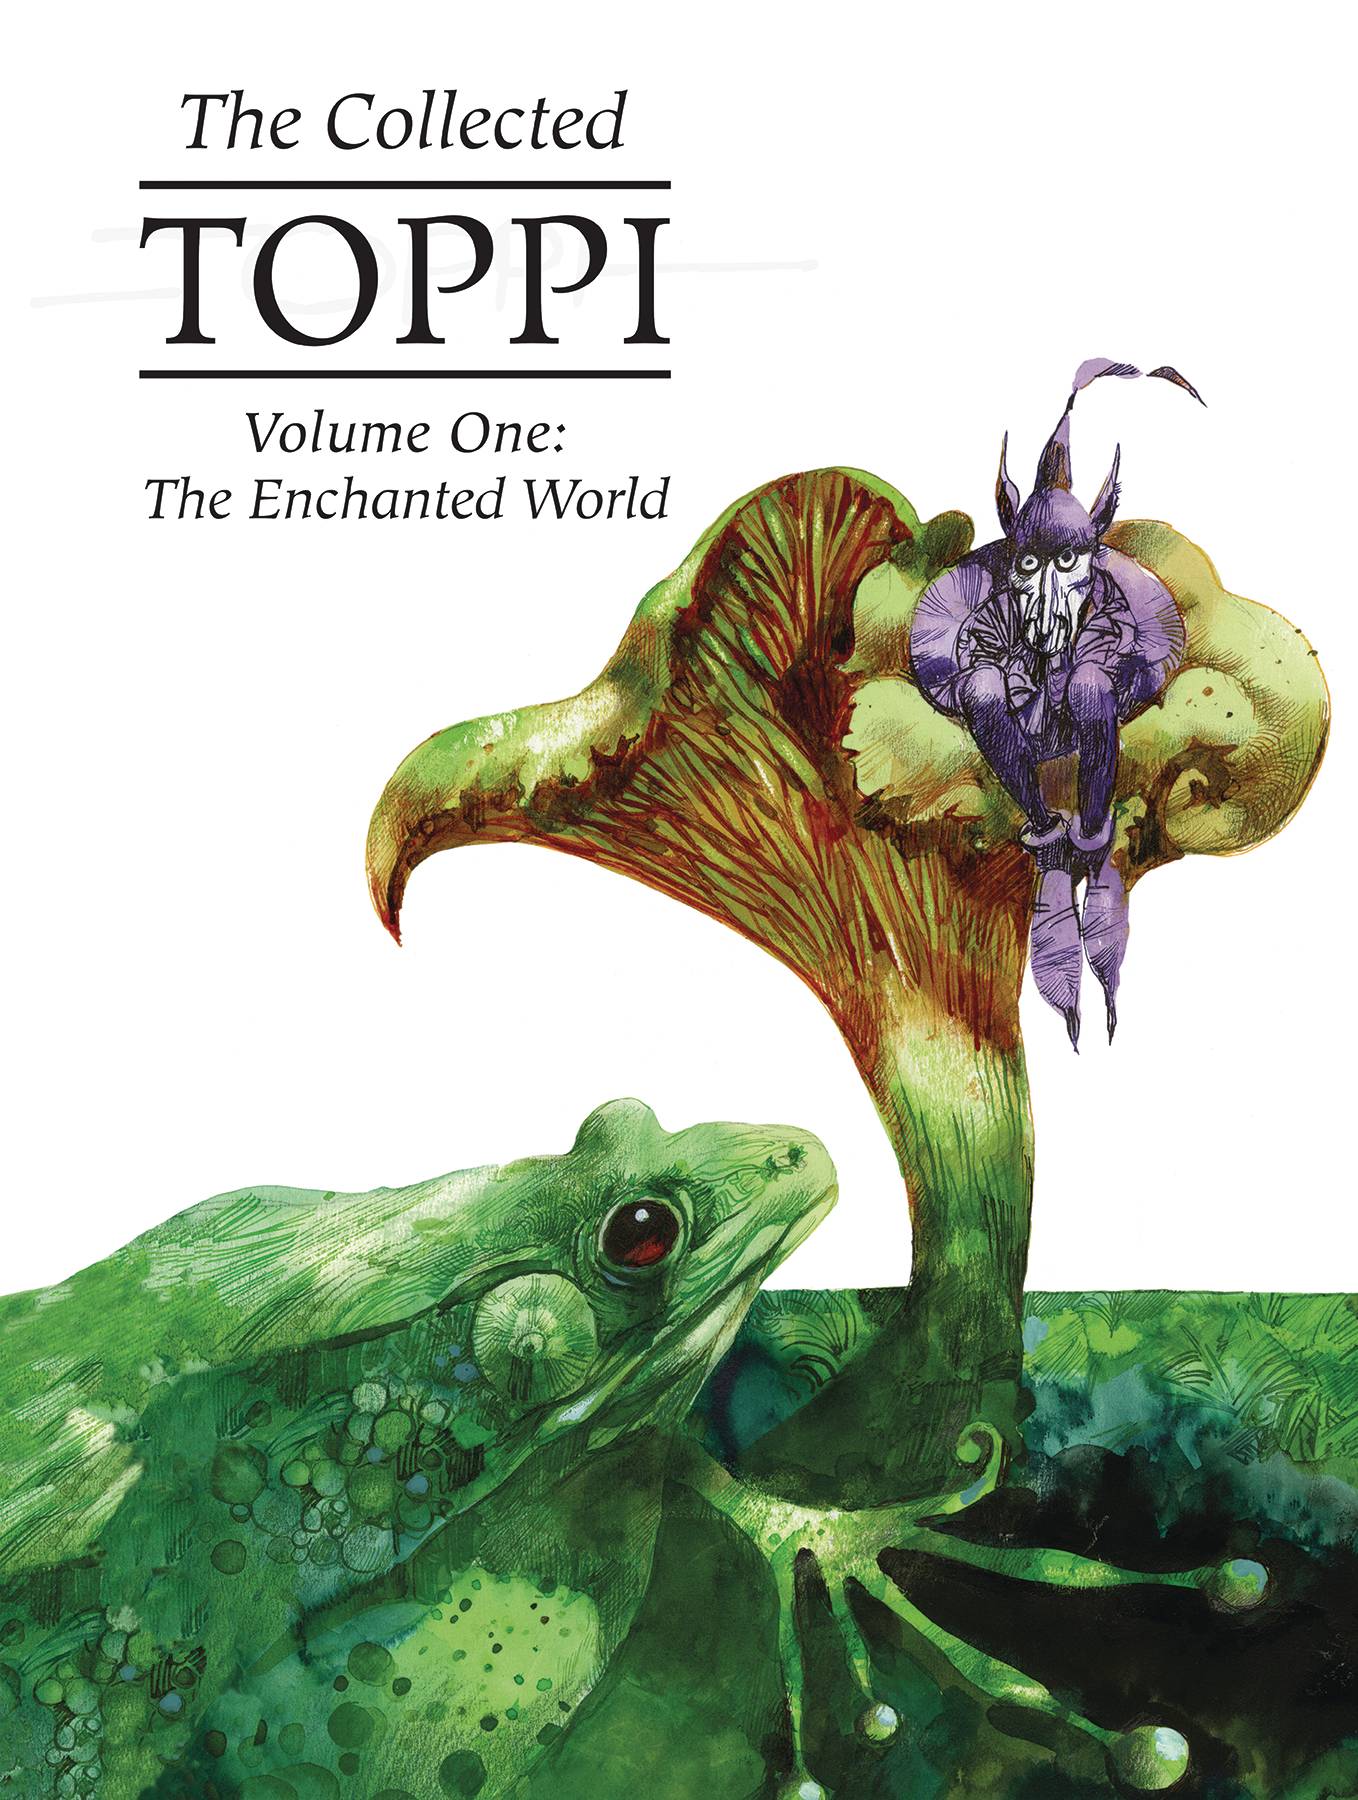 The Collected Toppi vol 1: The Enchanted World h/c